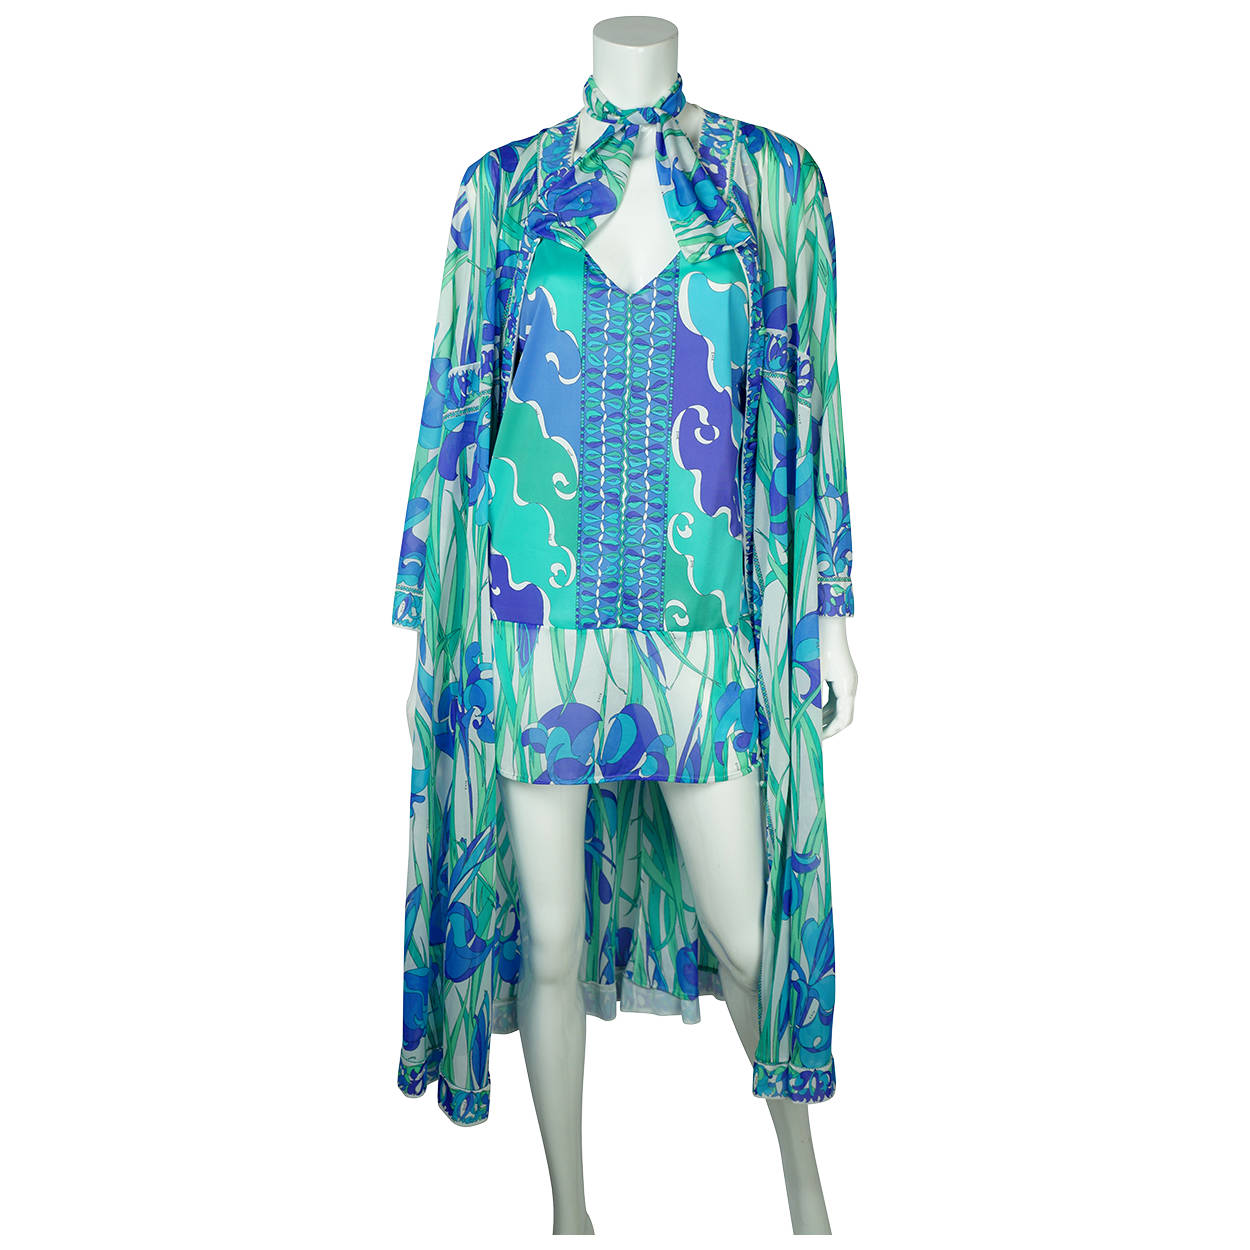 Emilio Pucci Quilted Robe SZ M/L Jacket Tunic Top for Formfit